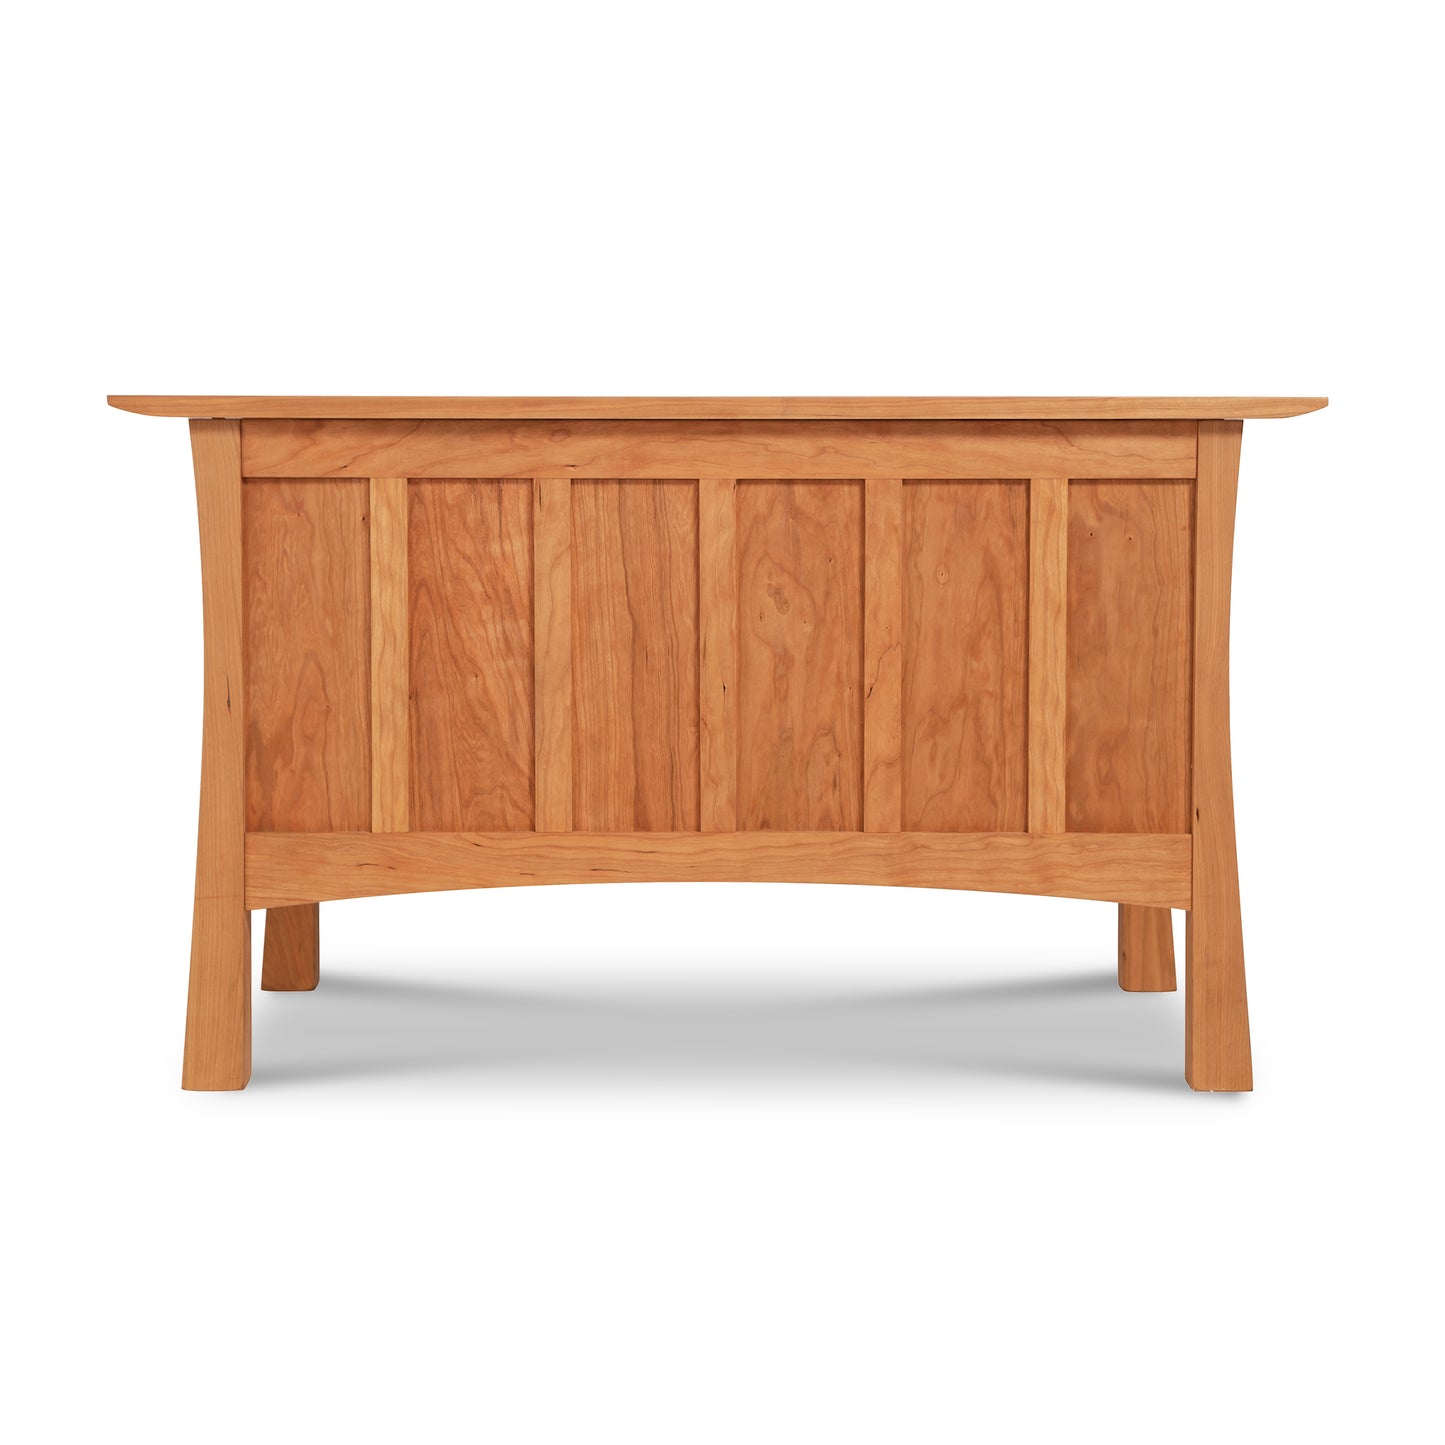 A Vermont Furniture Designs Contemporary Craftsman Blanket Chest on a white background.